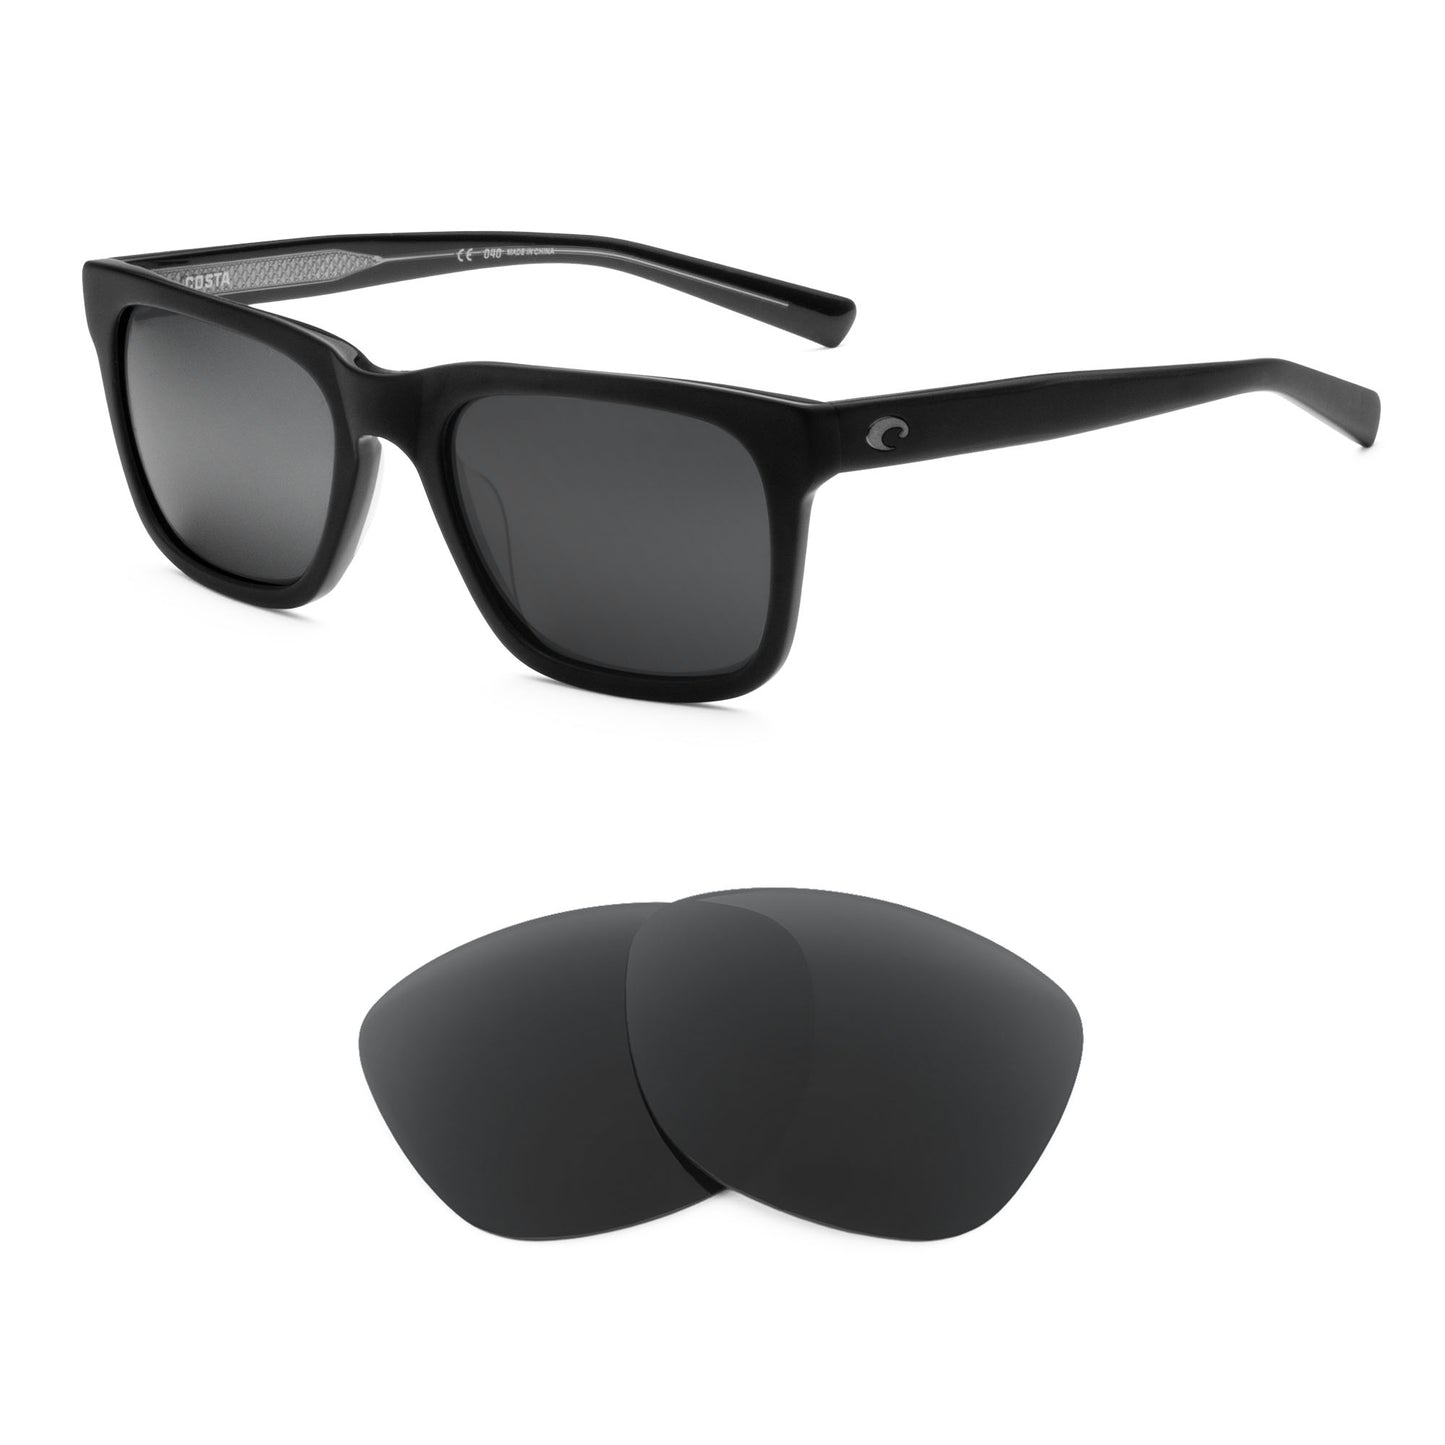 Costa Tybee sunglasses with replacement lenses